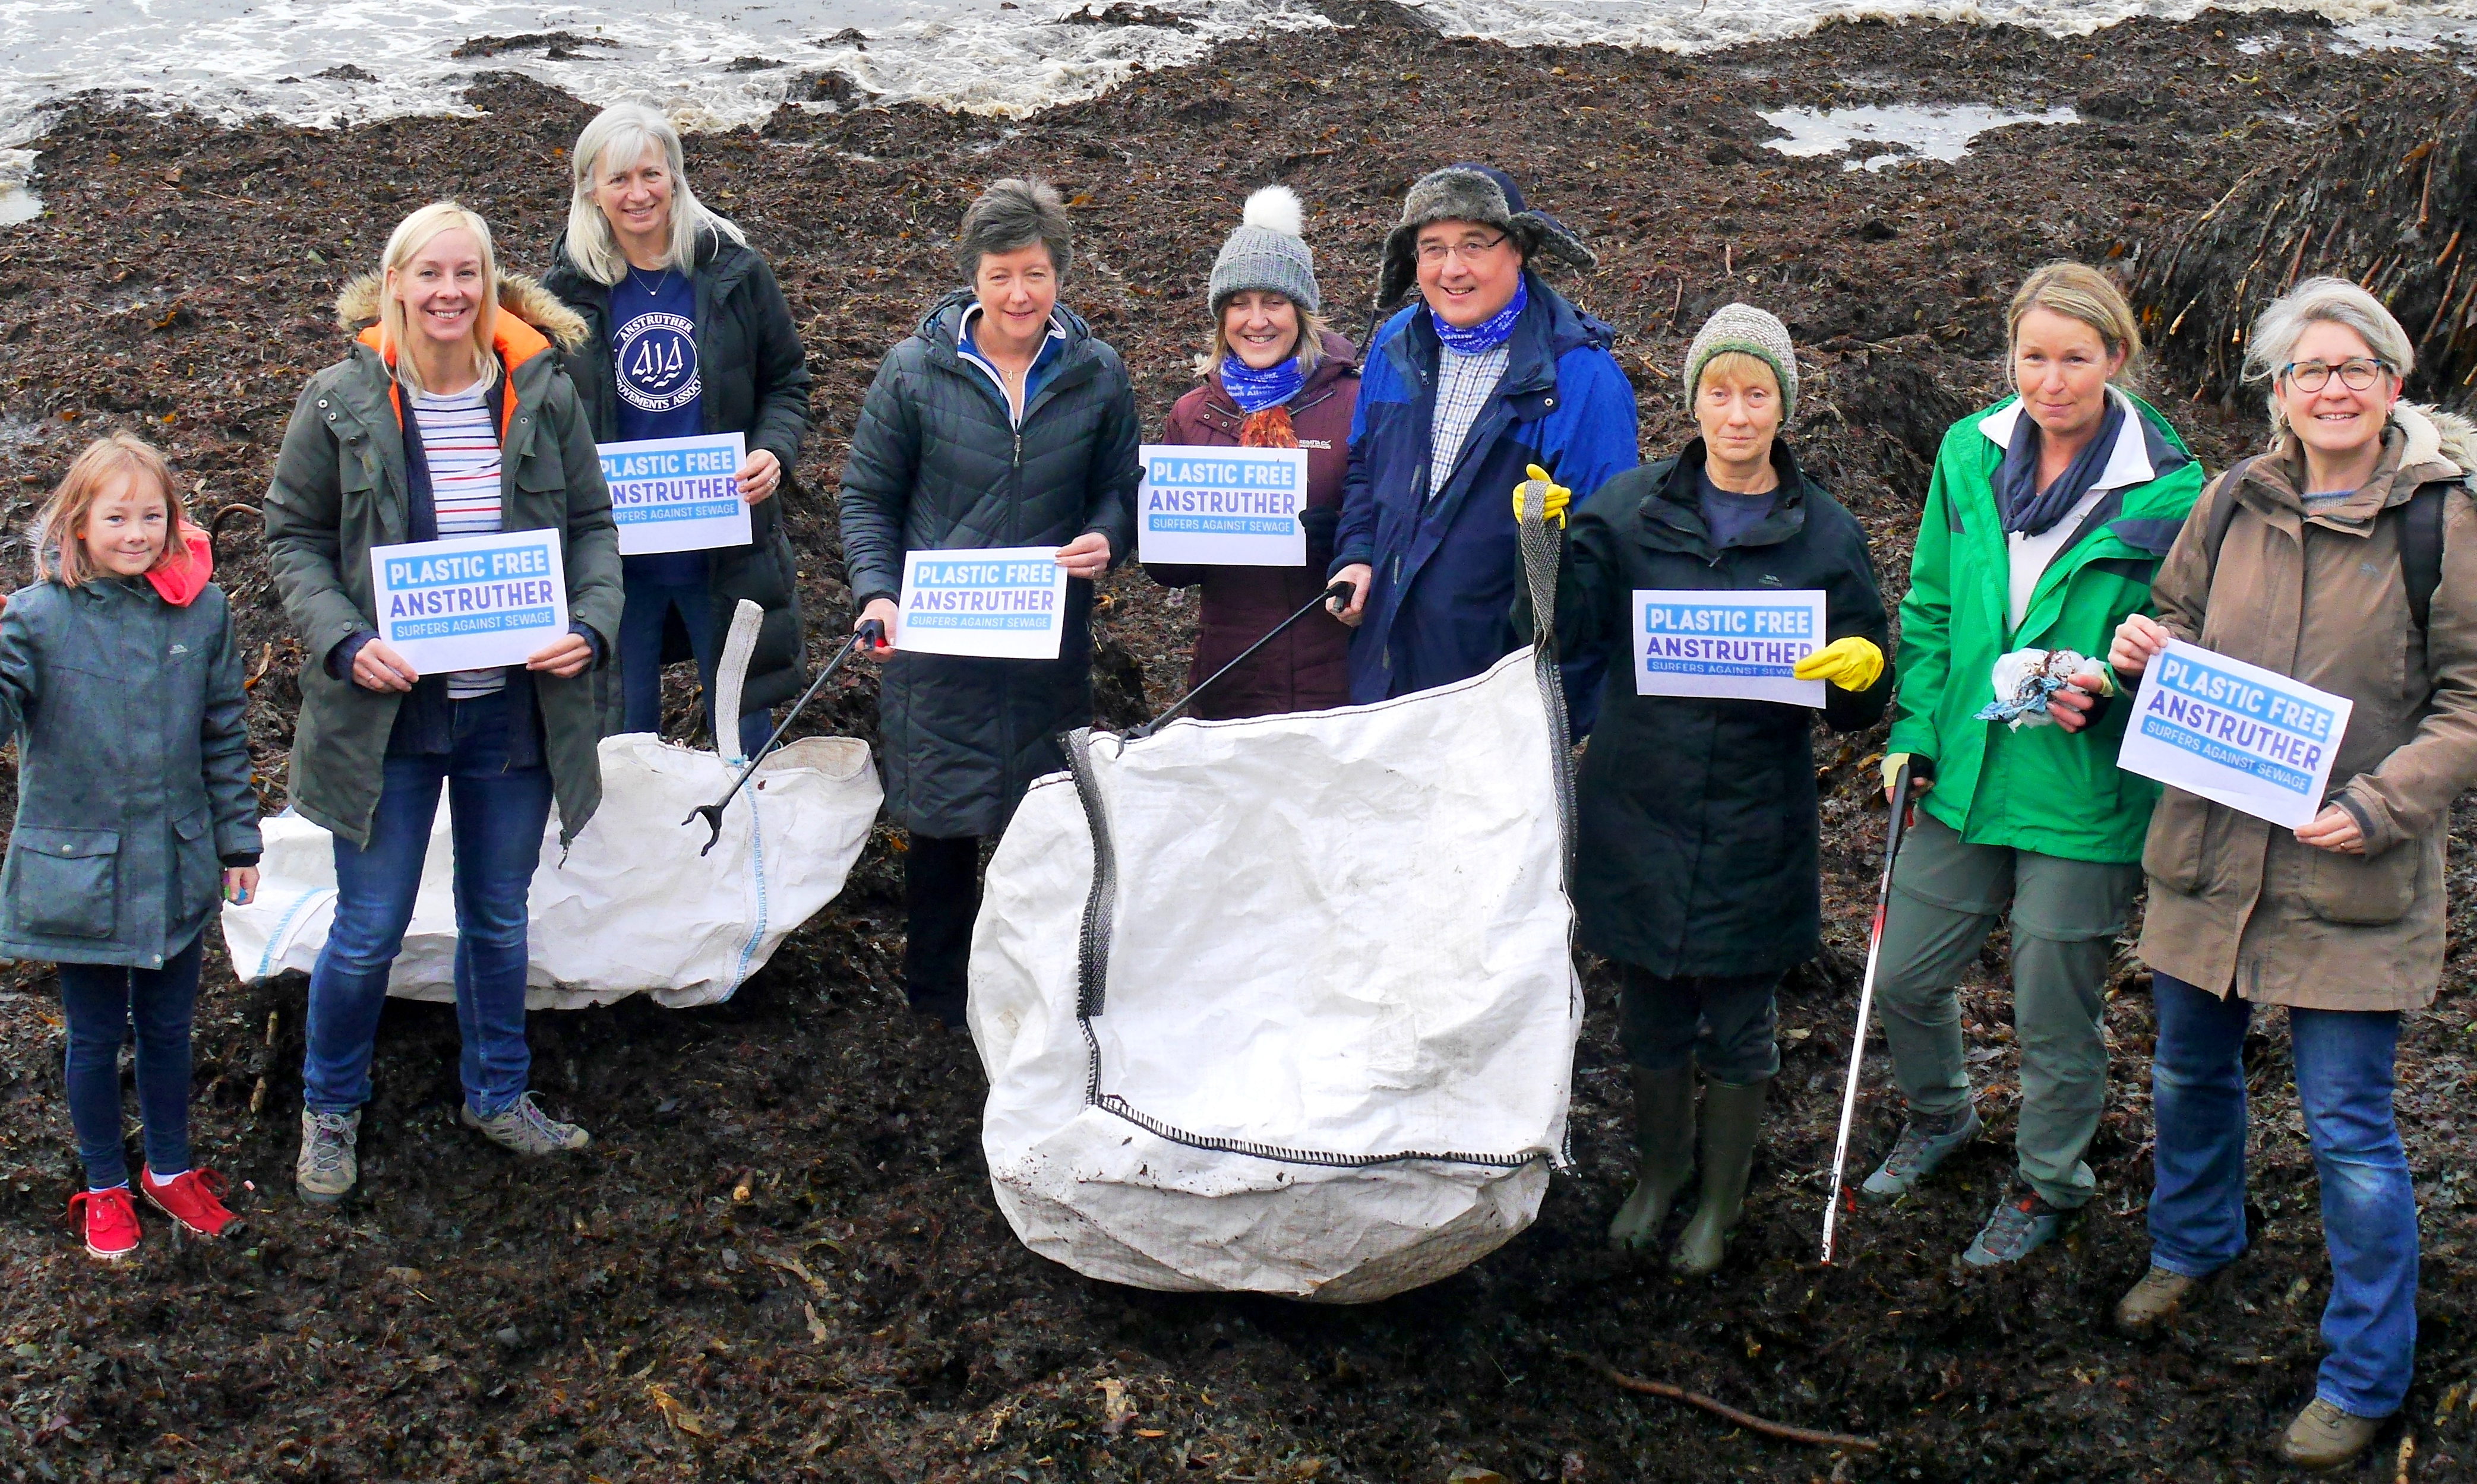 Plastic Free Anstruther members during a beach clean.